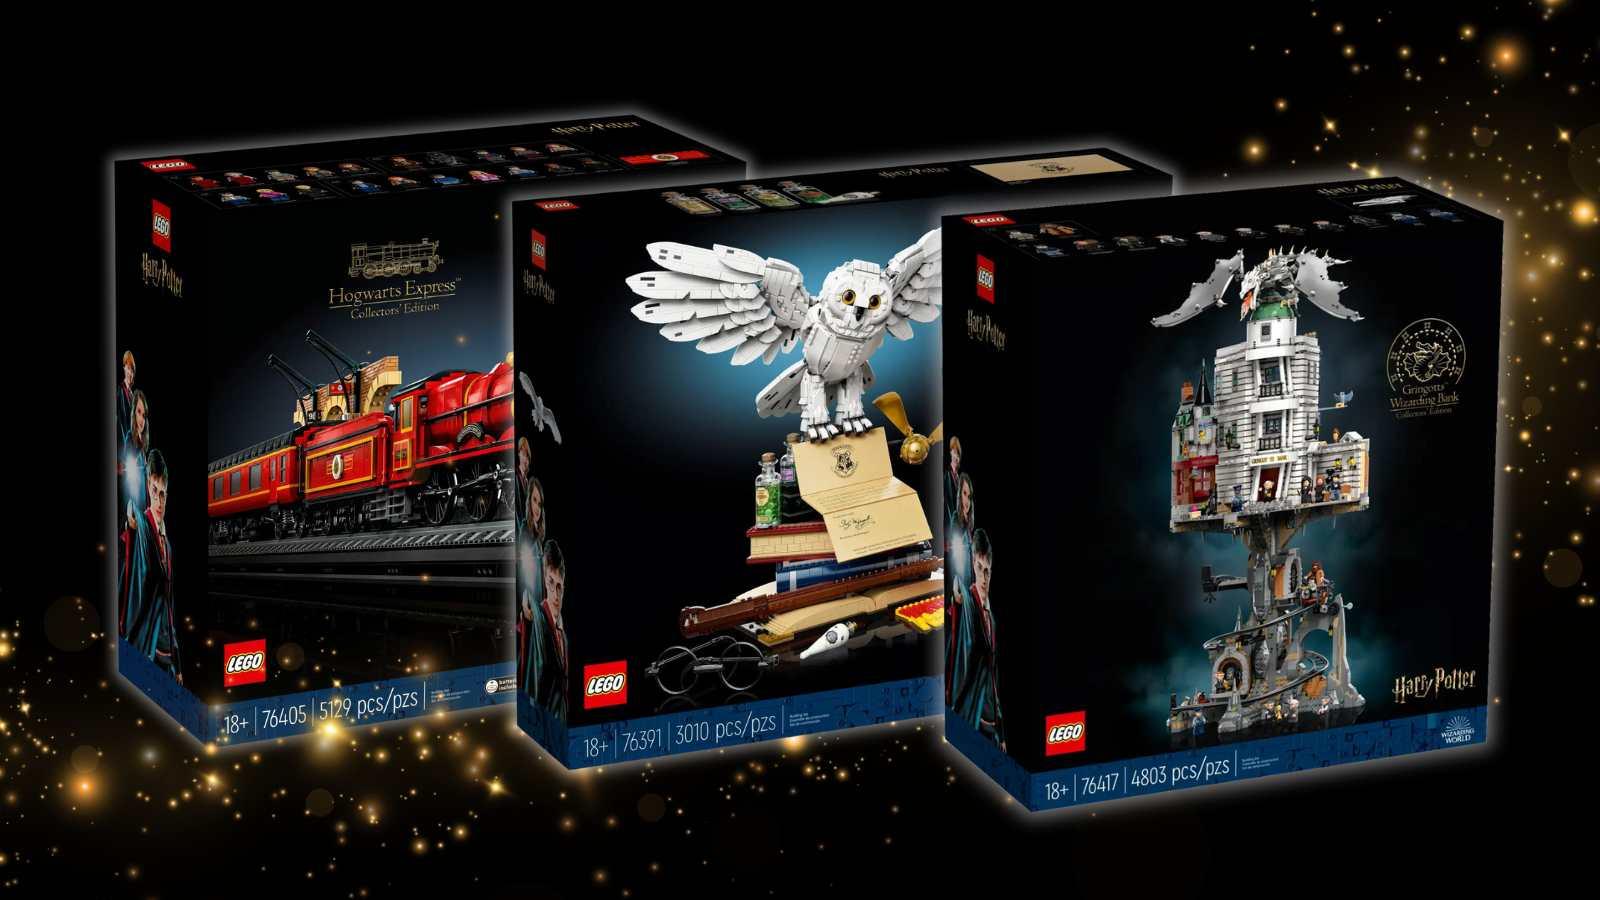 Three of the best LEGO Harry Potter Collectors' Edition sets on a black background with a magic graphic.